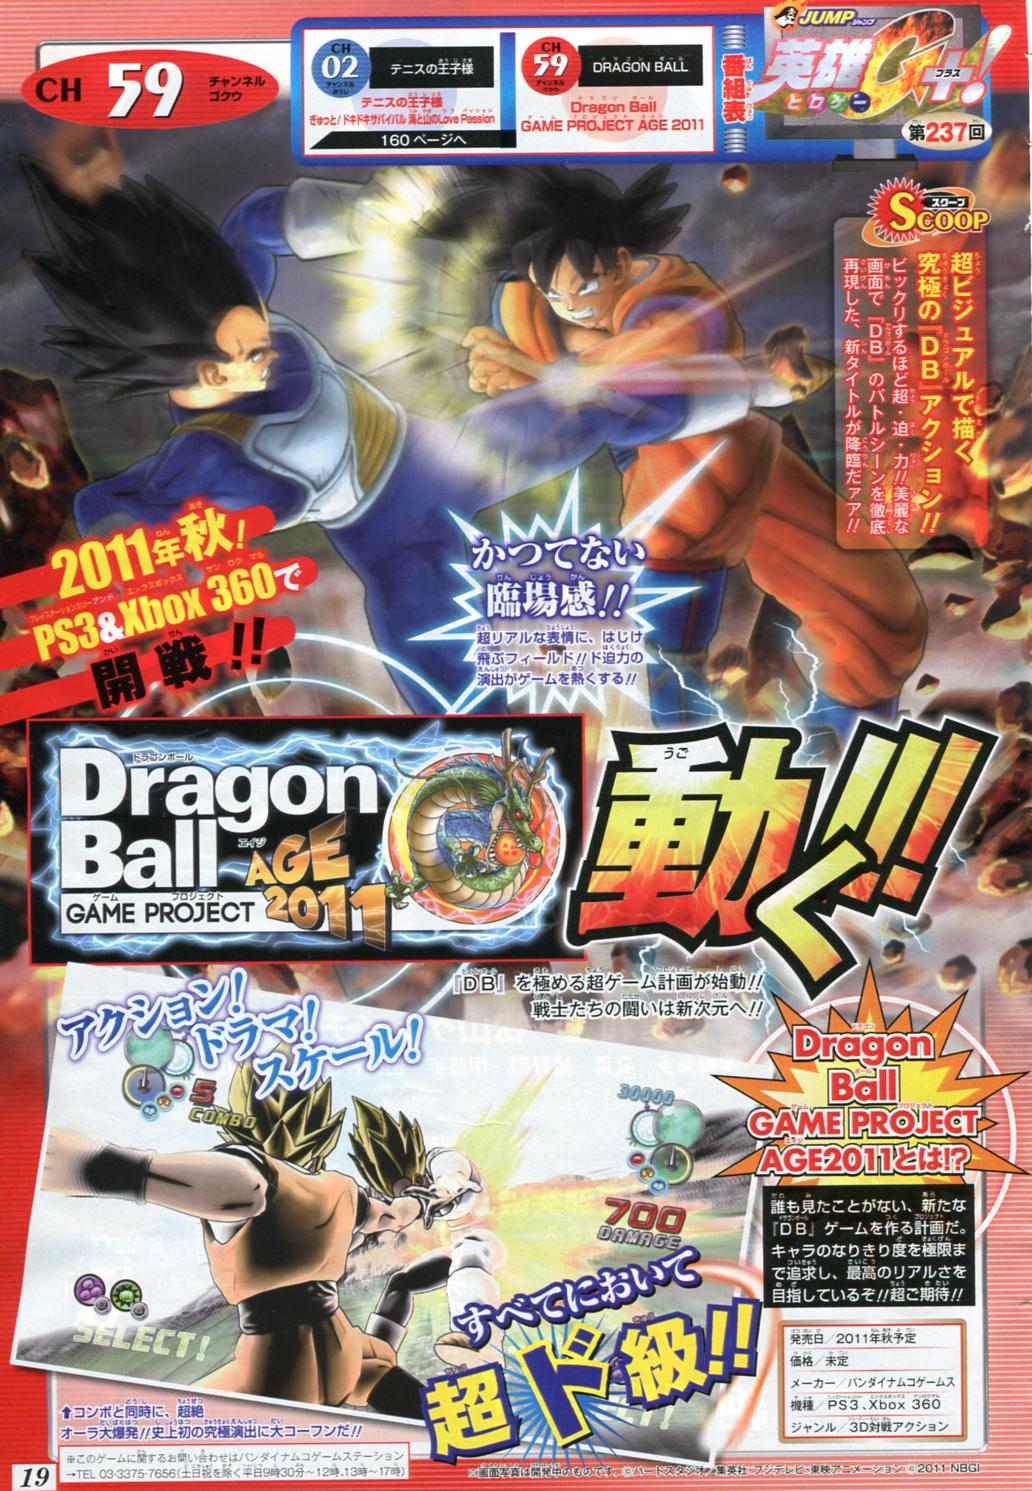 http://www.db-z.com/images/dragon_ball_game_project_age_2011_2_g.jpg